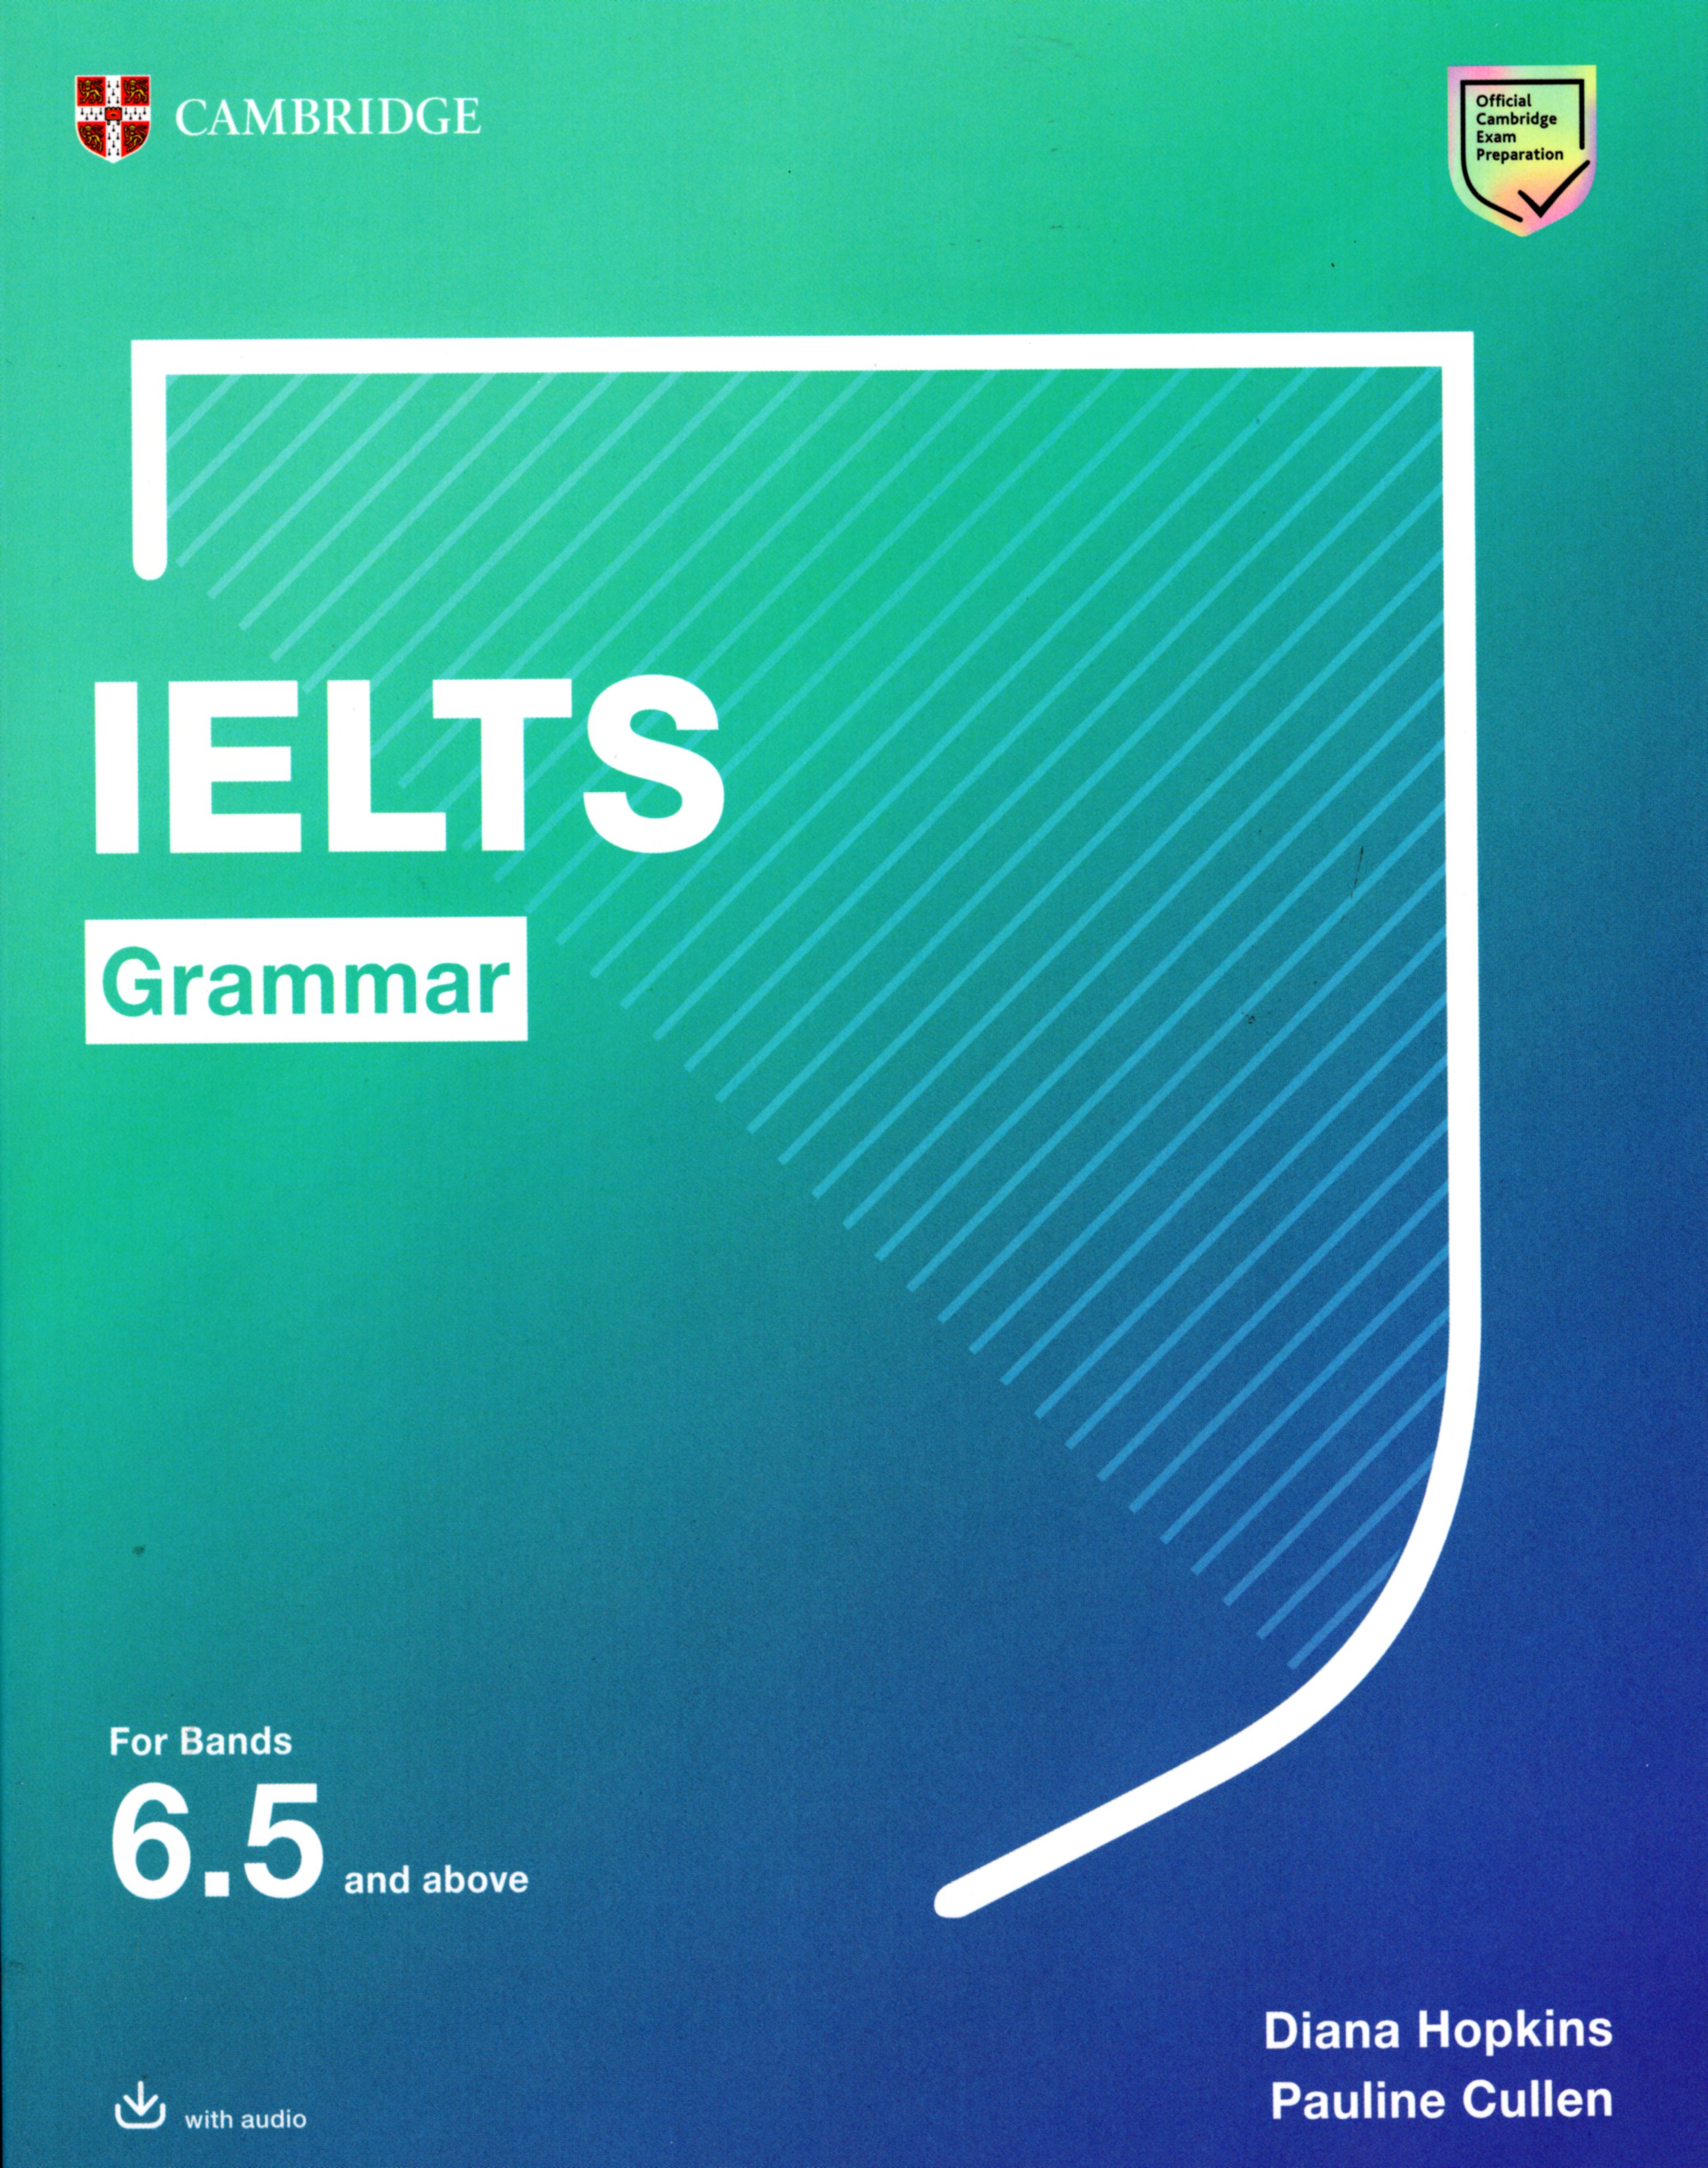 IELTS GRAMMAR FOR BANDS 6.5 AND ABOVE ( DOWNLOADABLE AUDIO) WA